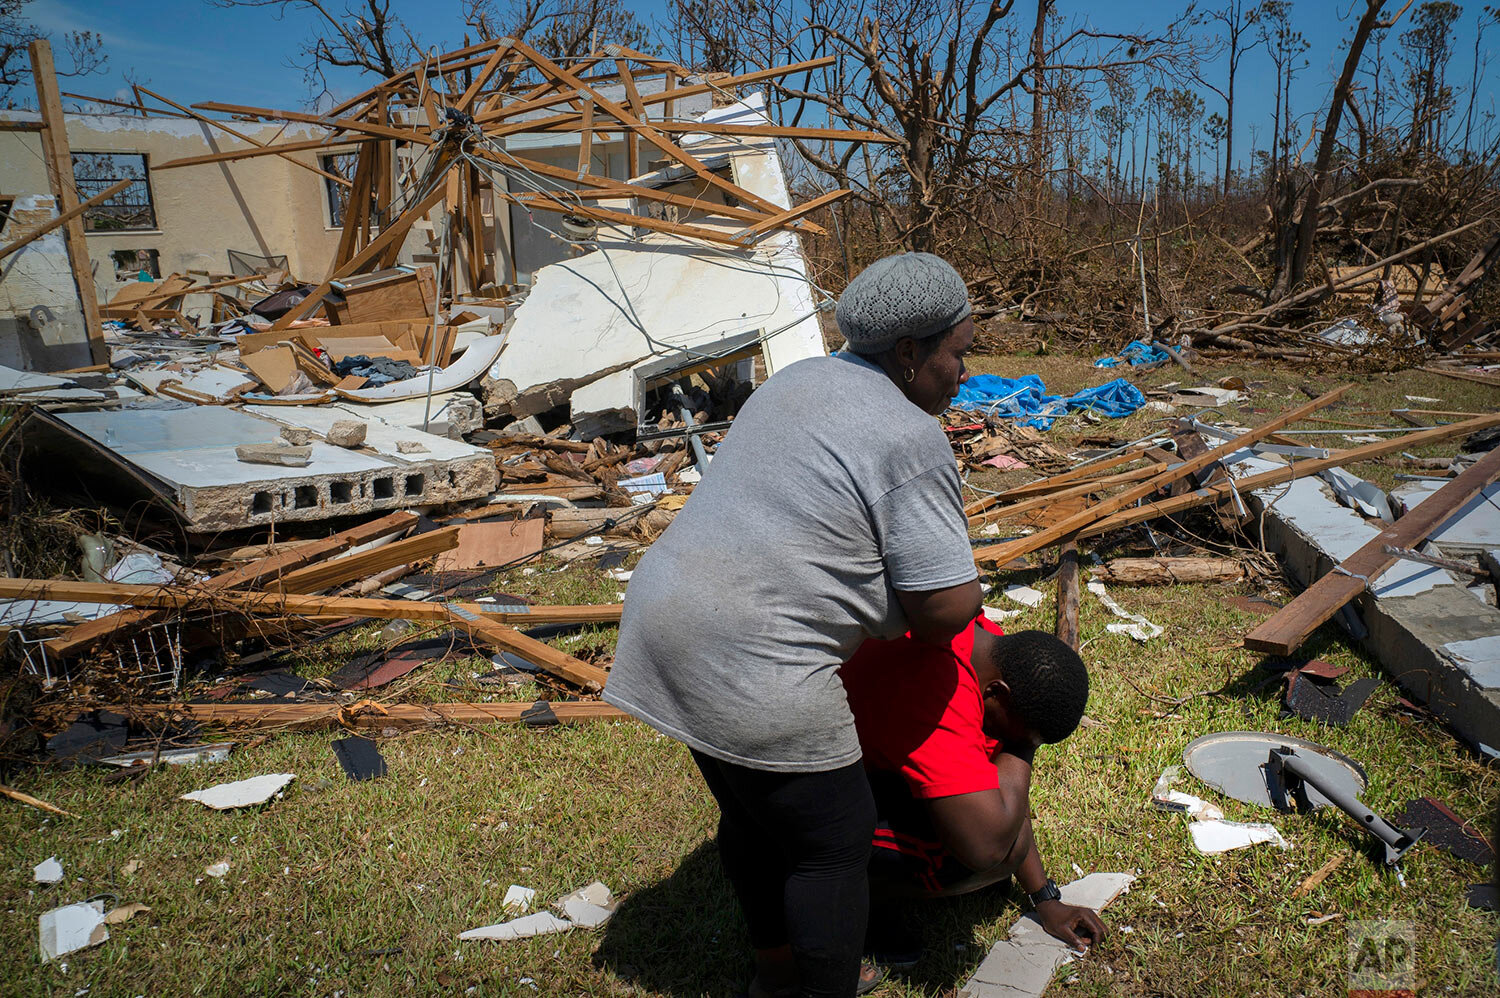  A woman comforts a man who cries after discovering his shattered house and not knowing anything about his 8 relatives who lived in the house, missing in the aftermath of Hurricane Dorian, in High Rock, Grand Bahama, Bahamas, Thursday, Sept. 5, 2019.